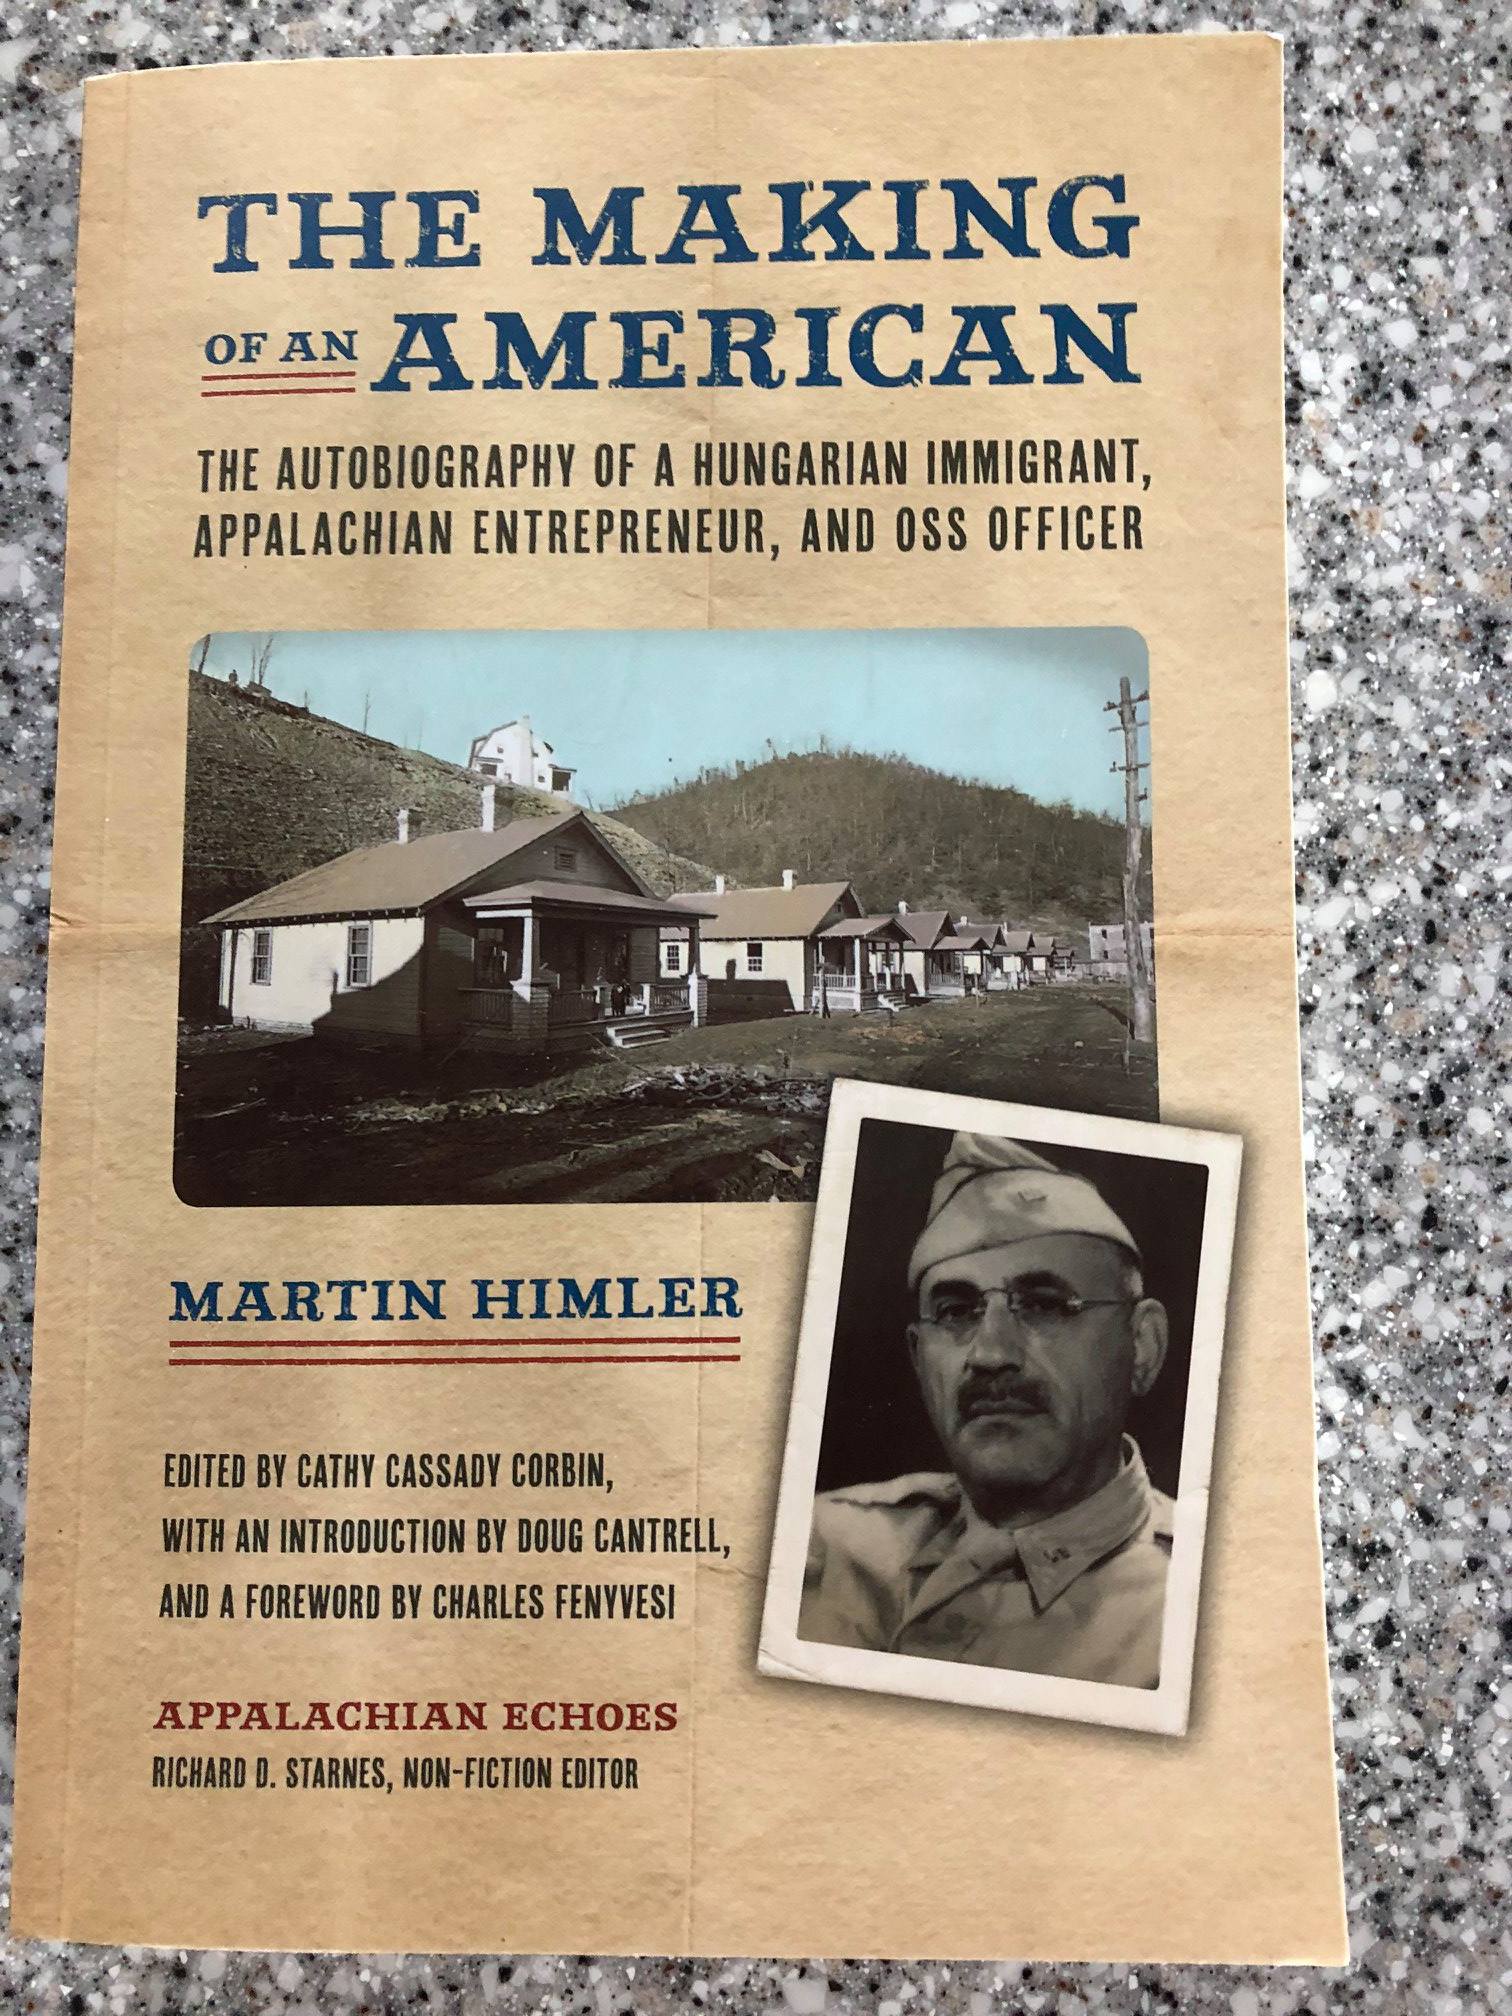 Martin County Historical Society to host book signing at Holocaust Memorial Museum